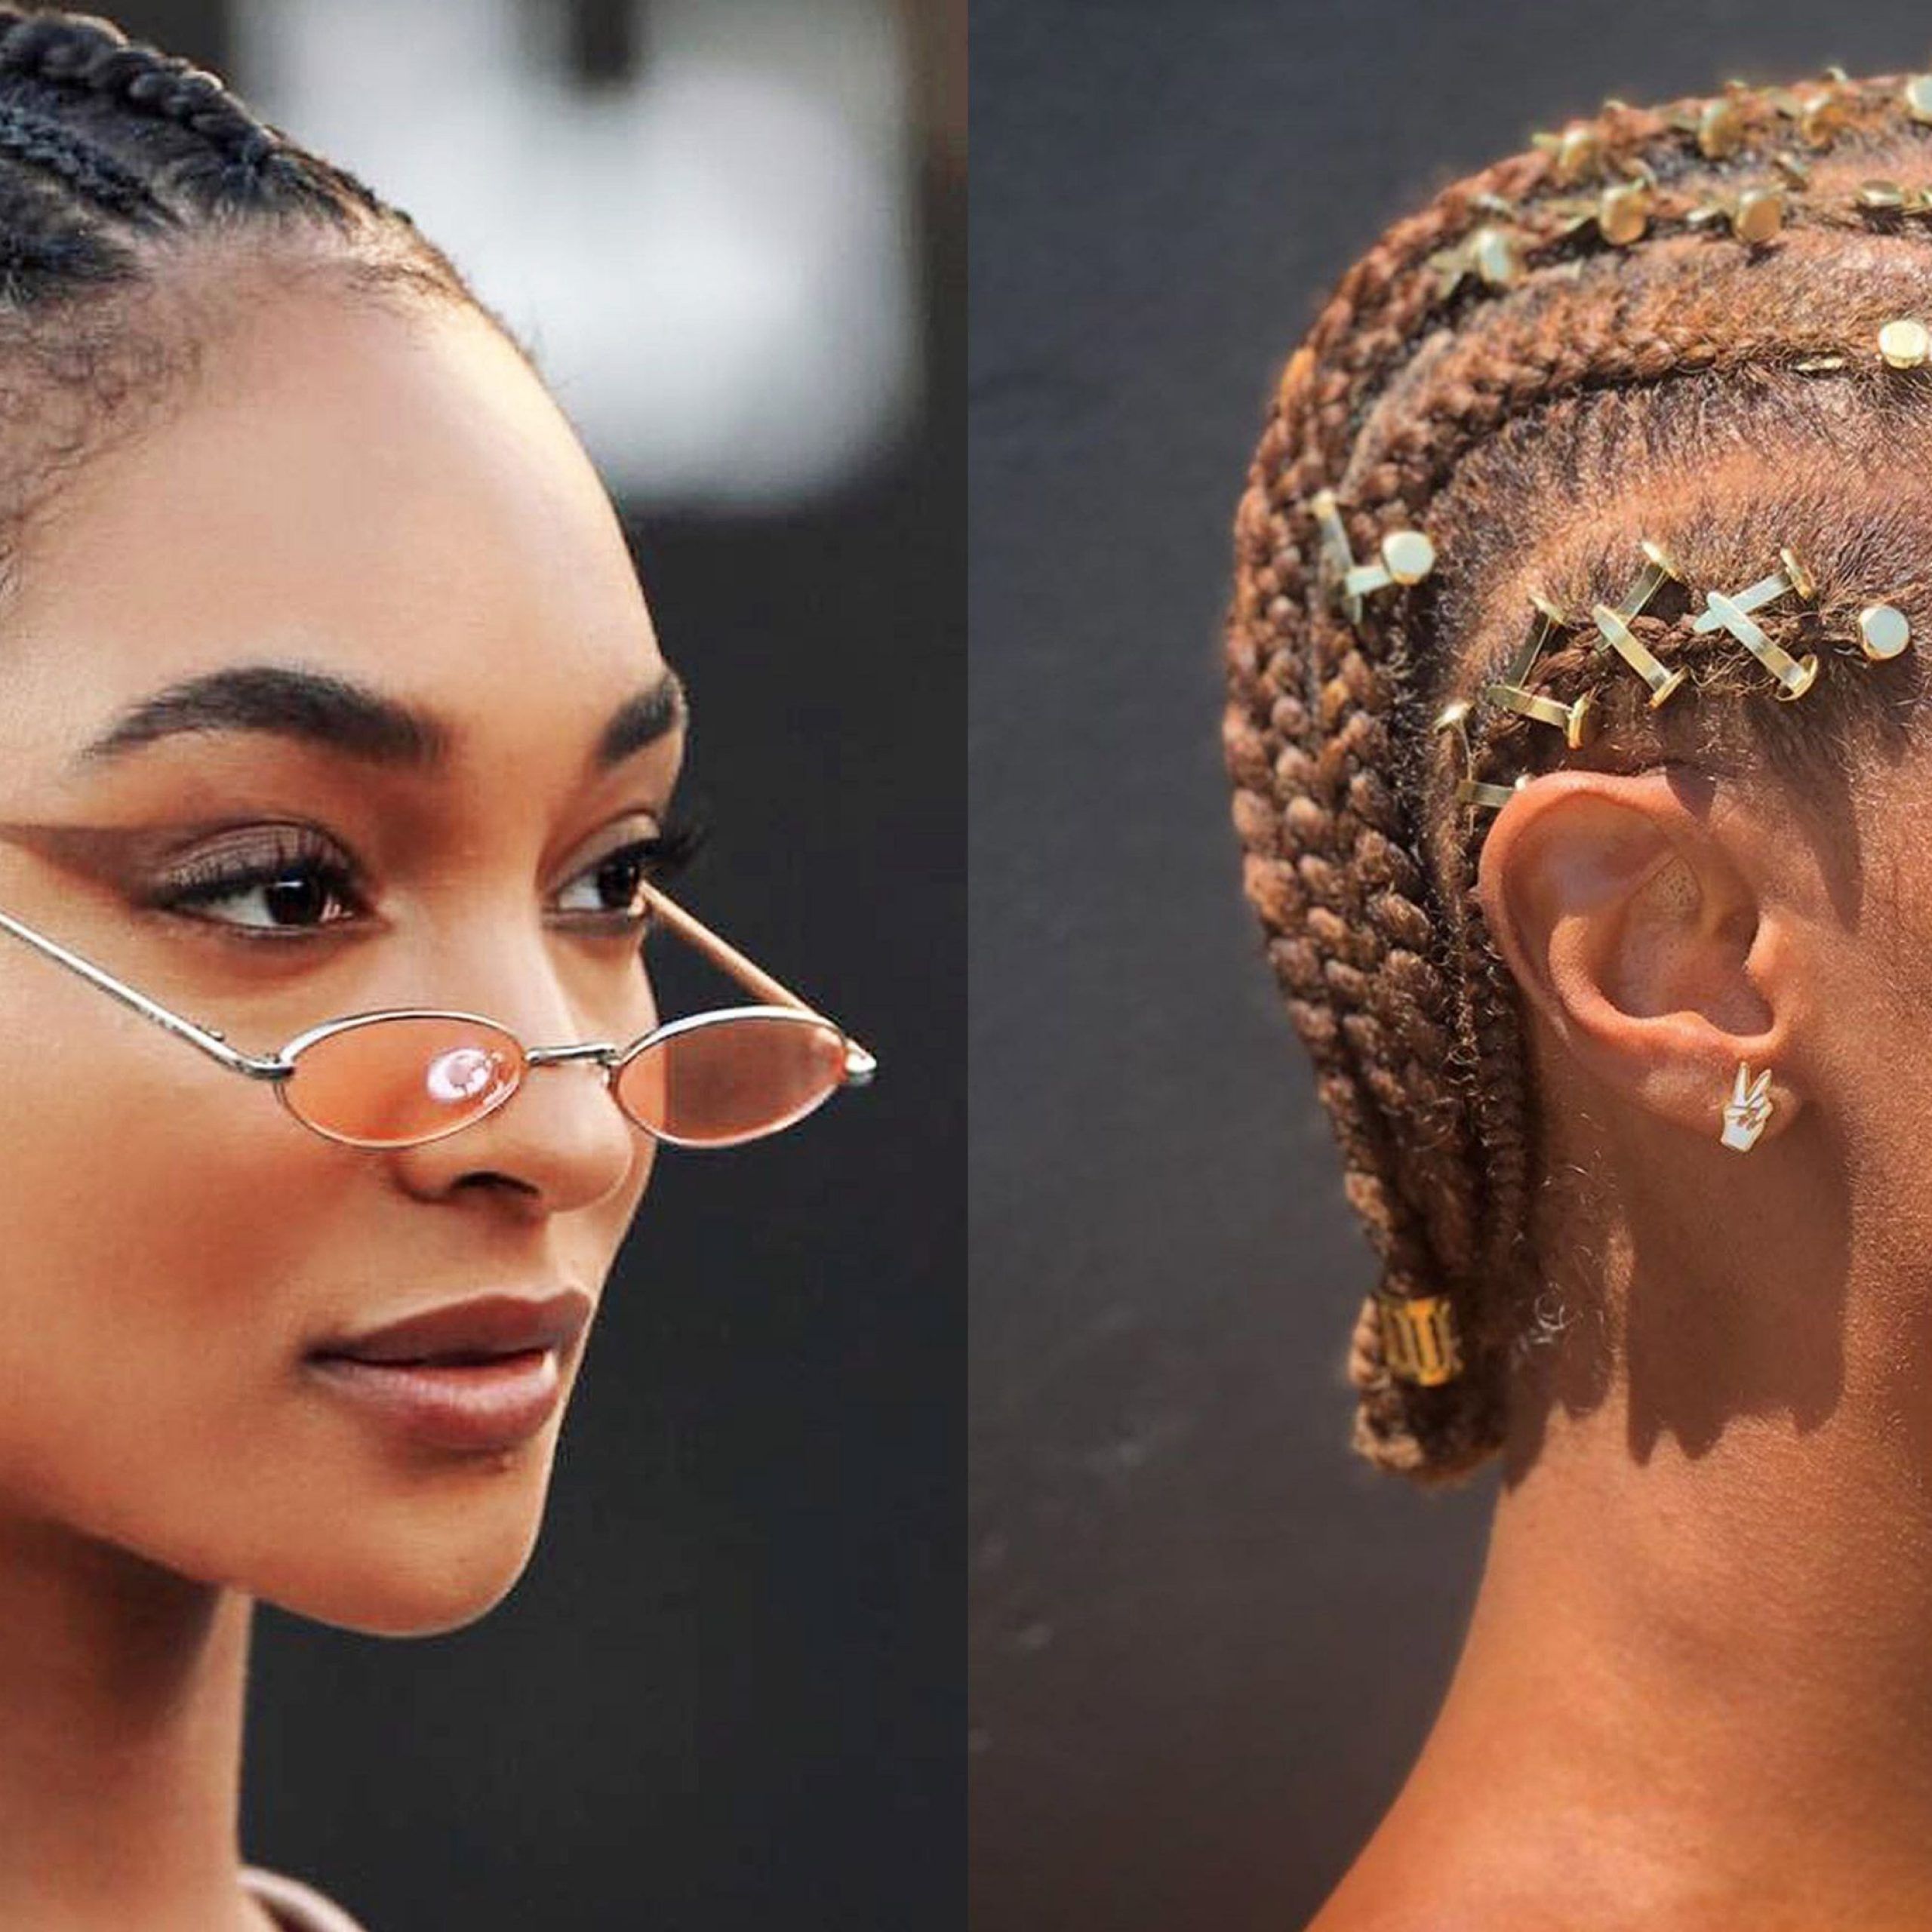 19 Stunning Cornrow Hairstyles To Try In 2019 Intended For Most Recent Zig Zag Cornrows Hairstyles (View 8 of 20)